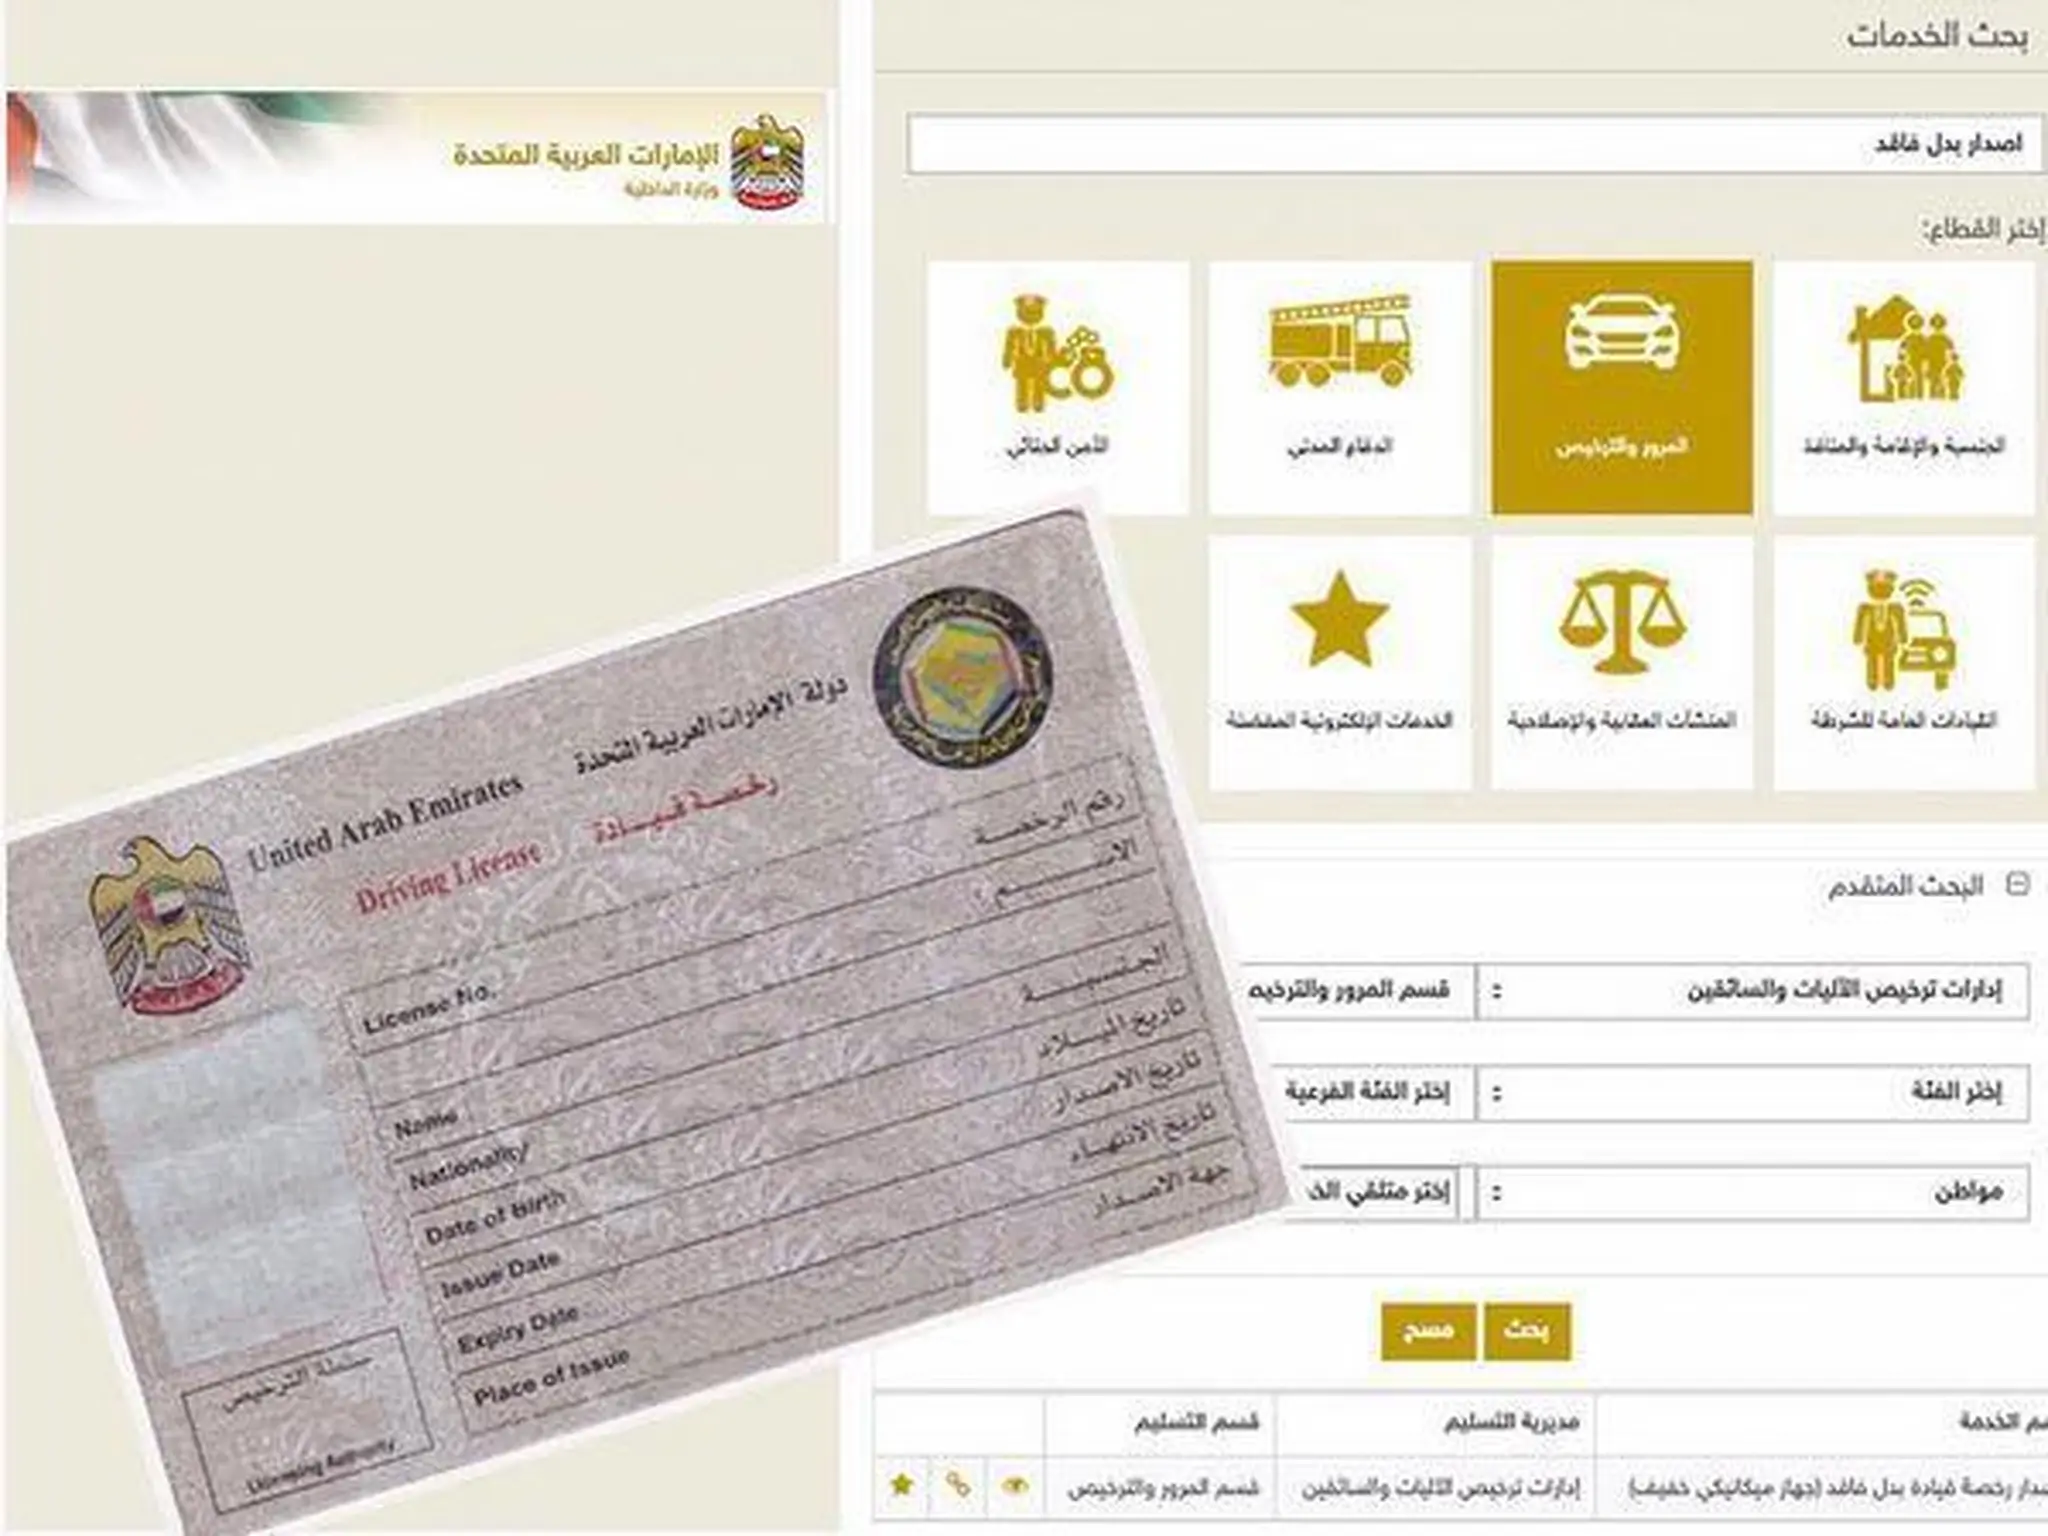 Determine the procedures for replacing driving licenses in the Emirates